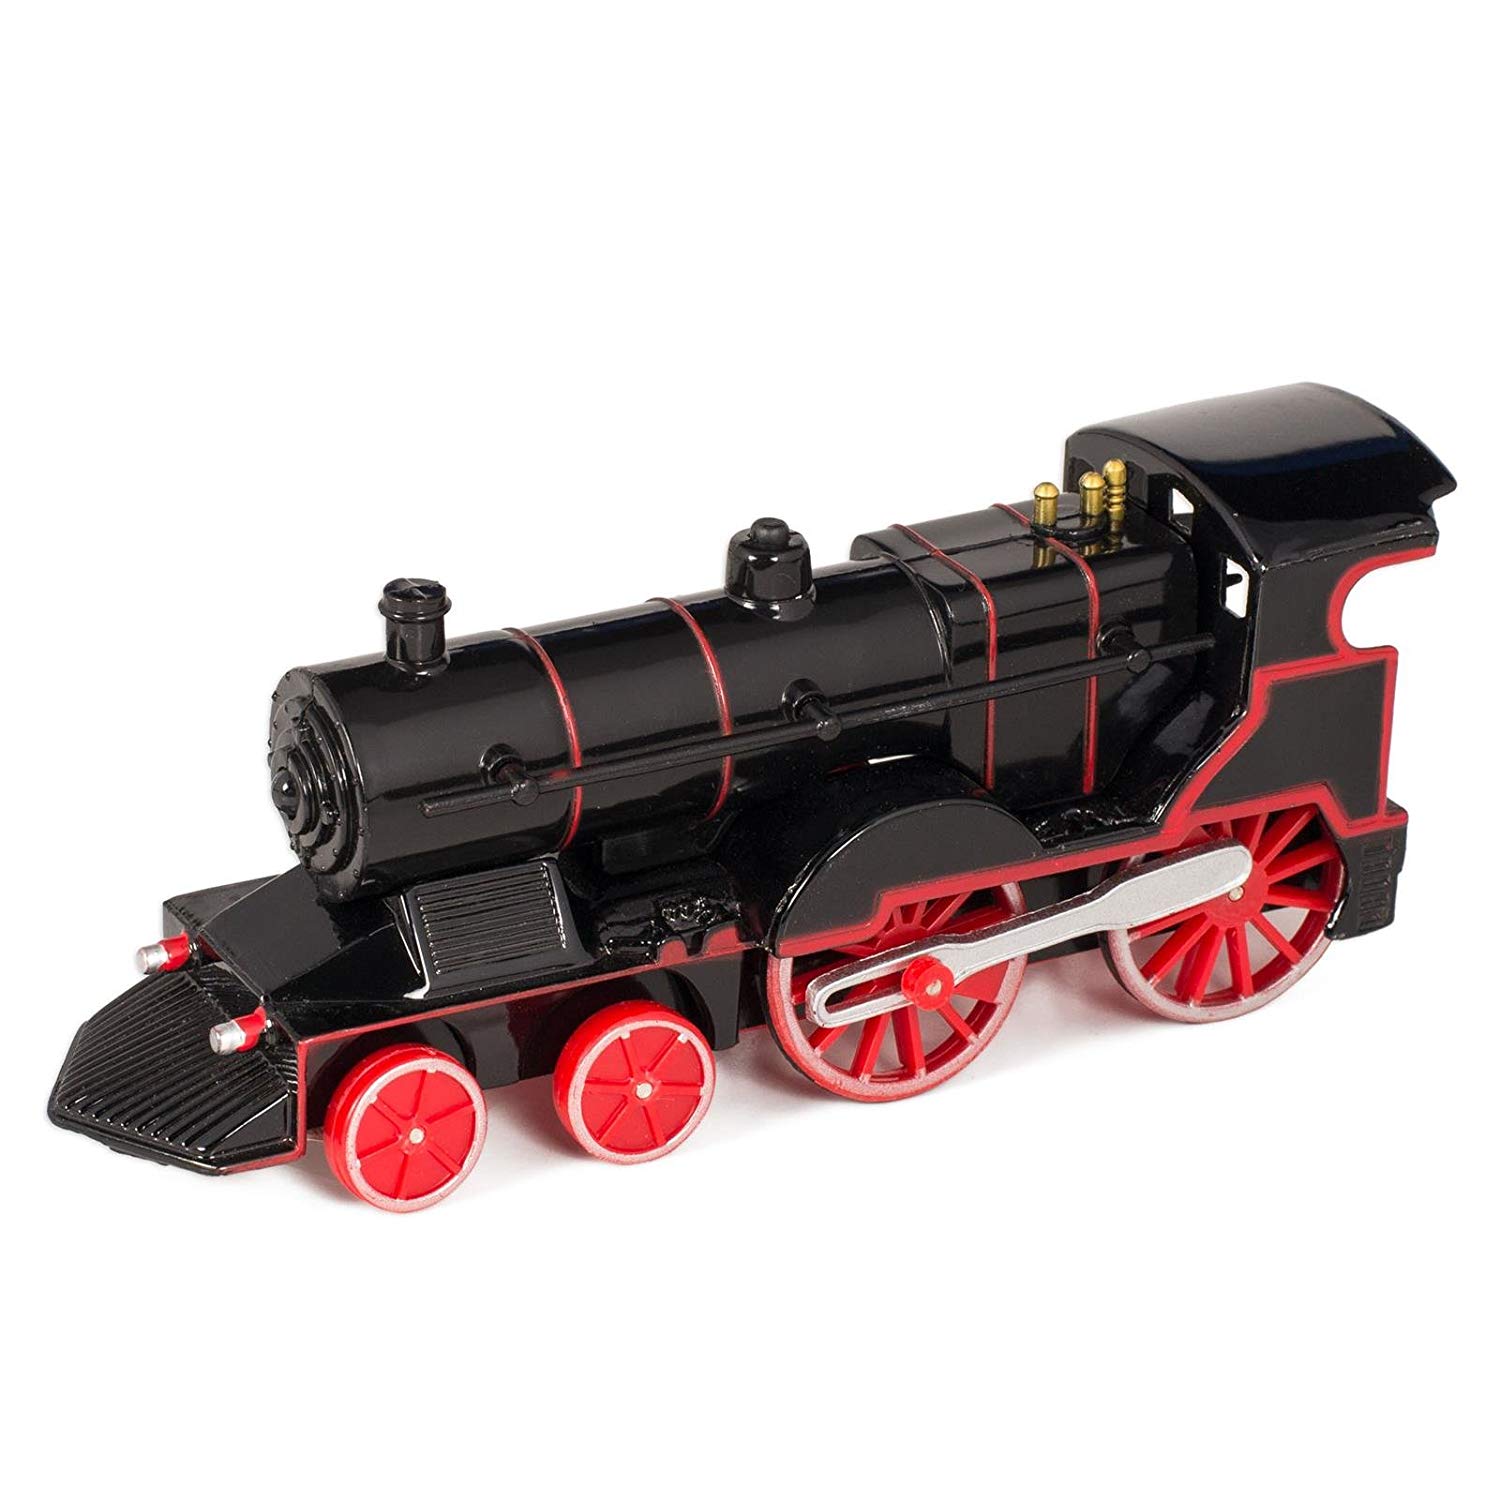 Amazon.com: Black Cast Metal Classic Train Toy with Sounds and ...